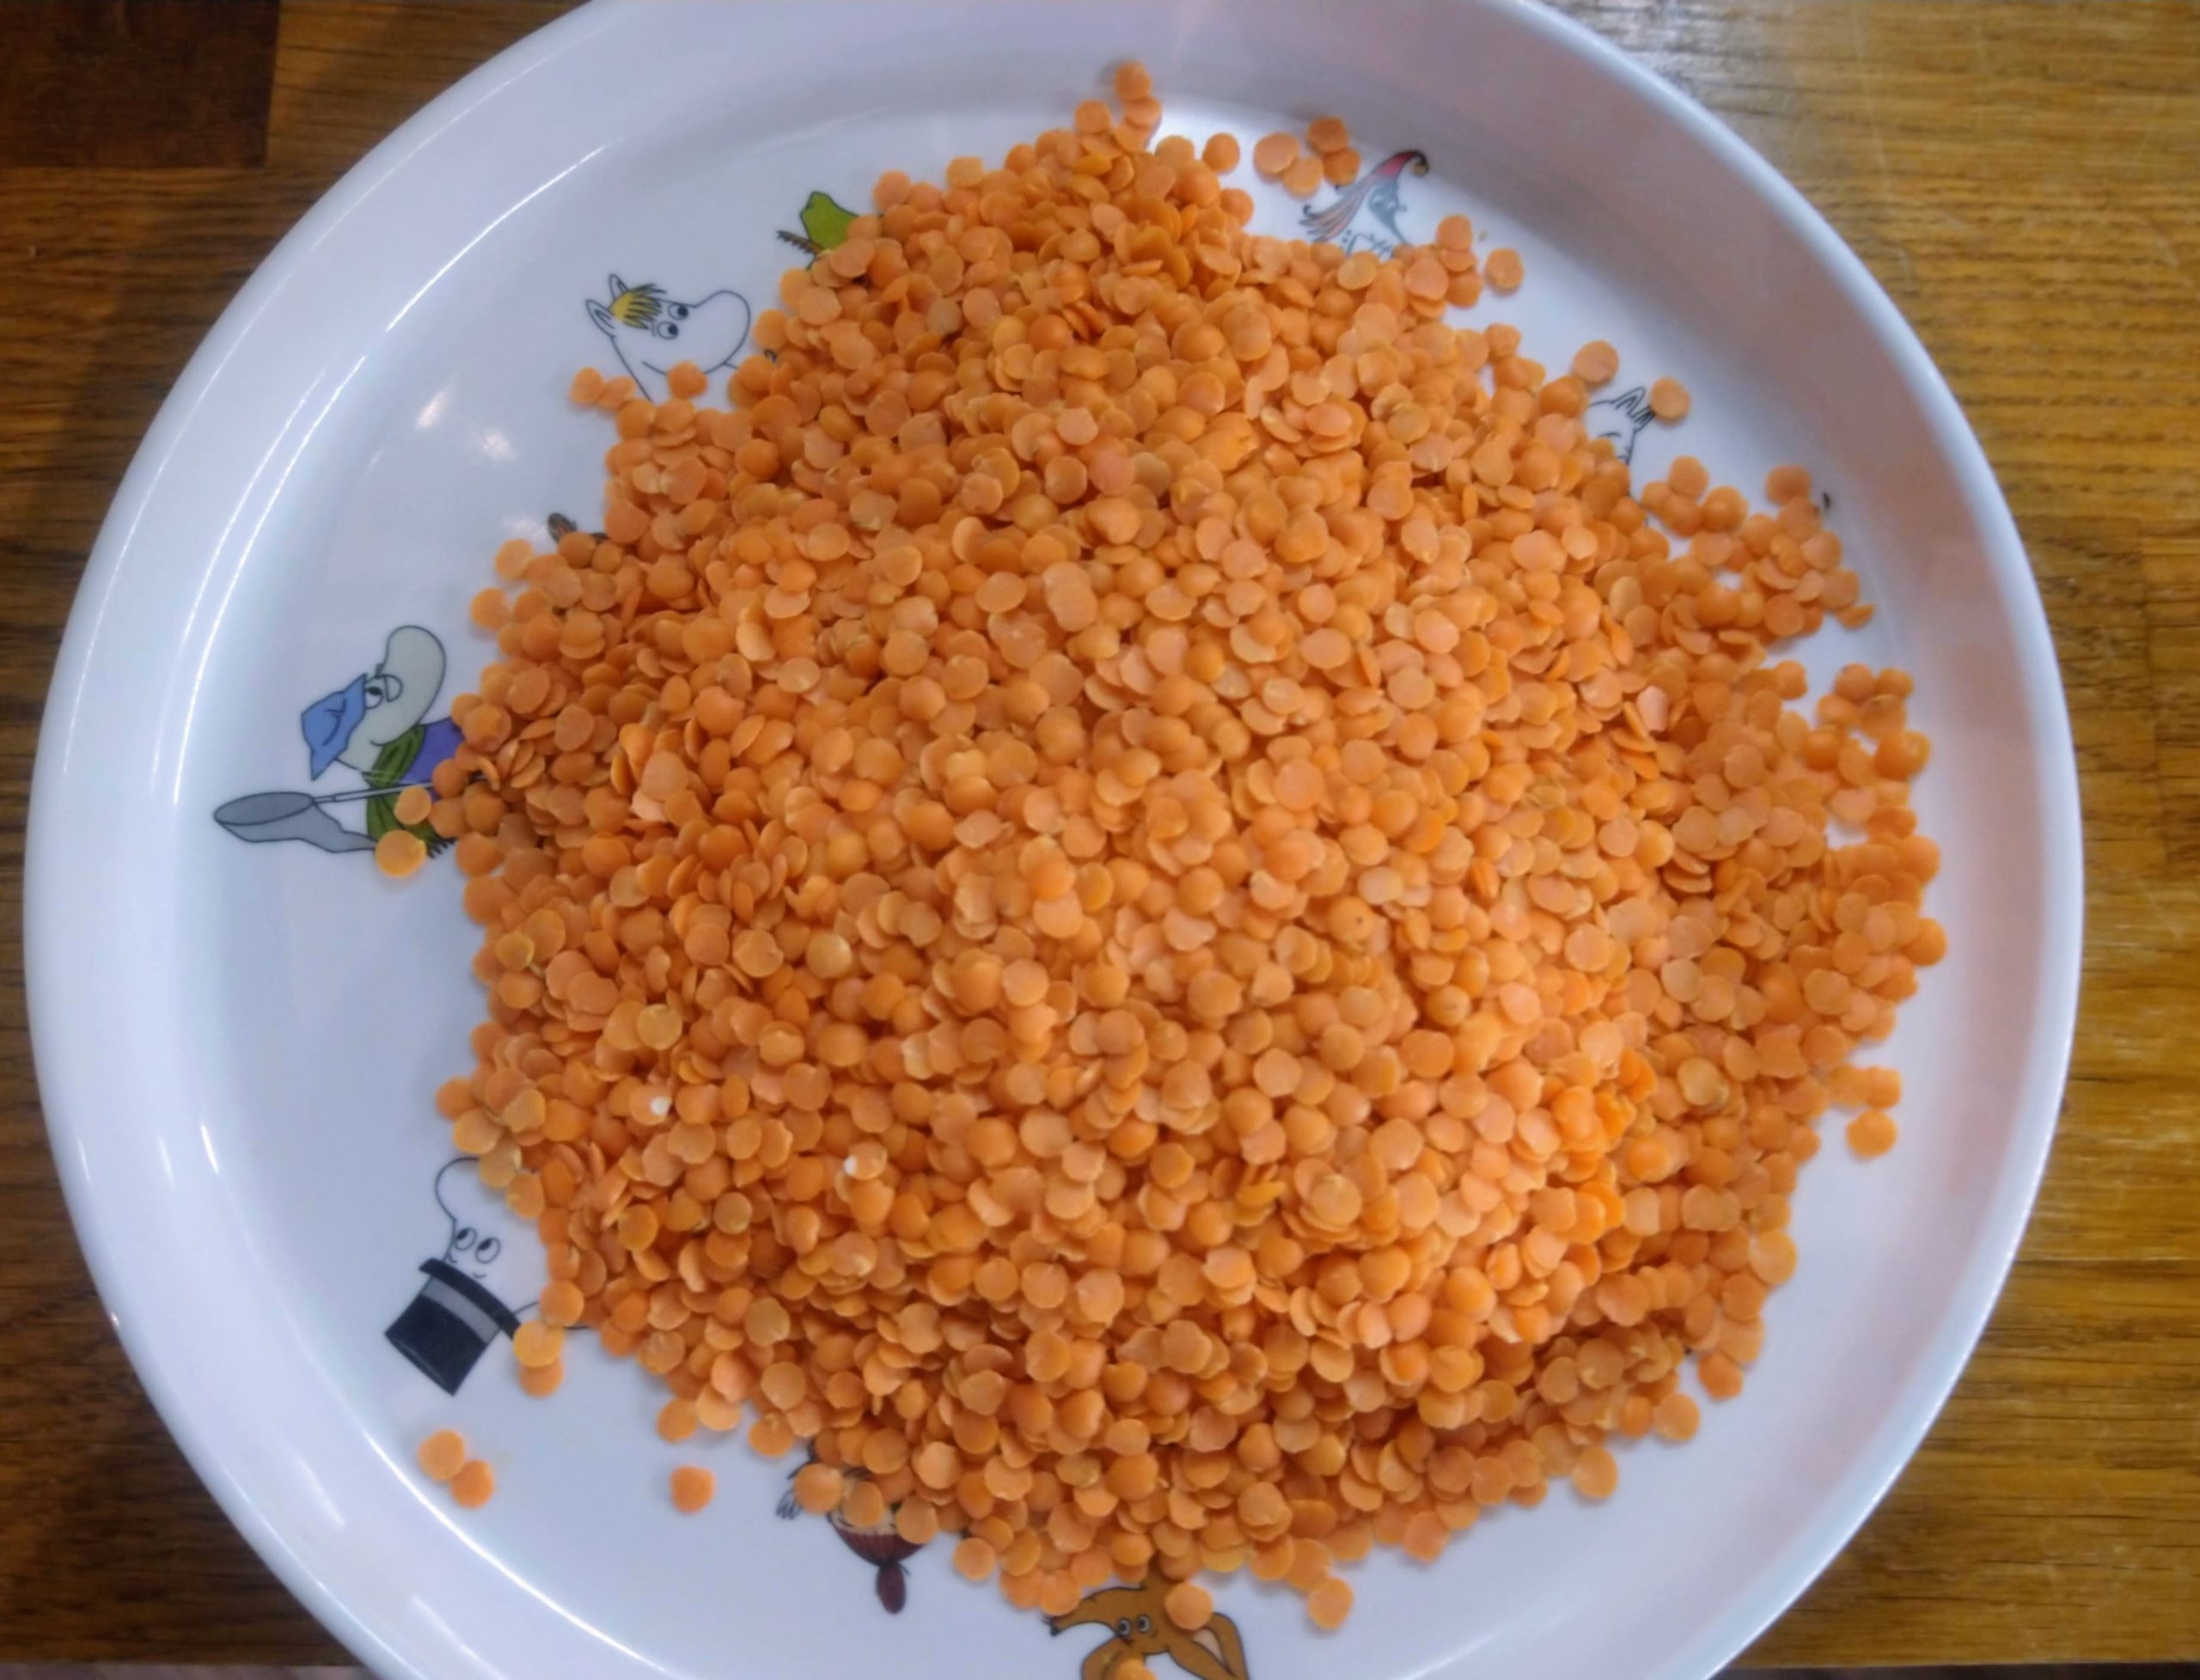 A children's white Moomin plate with a pile of red lentils